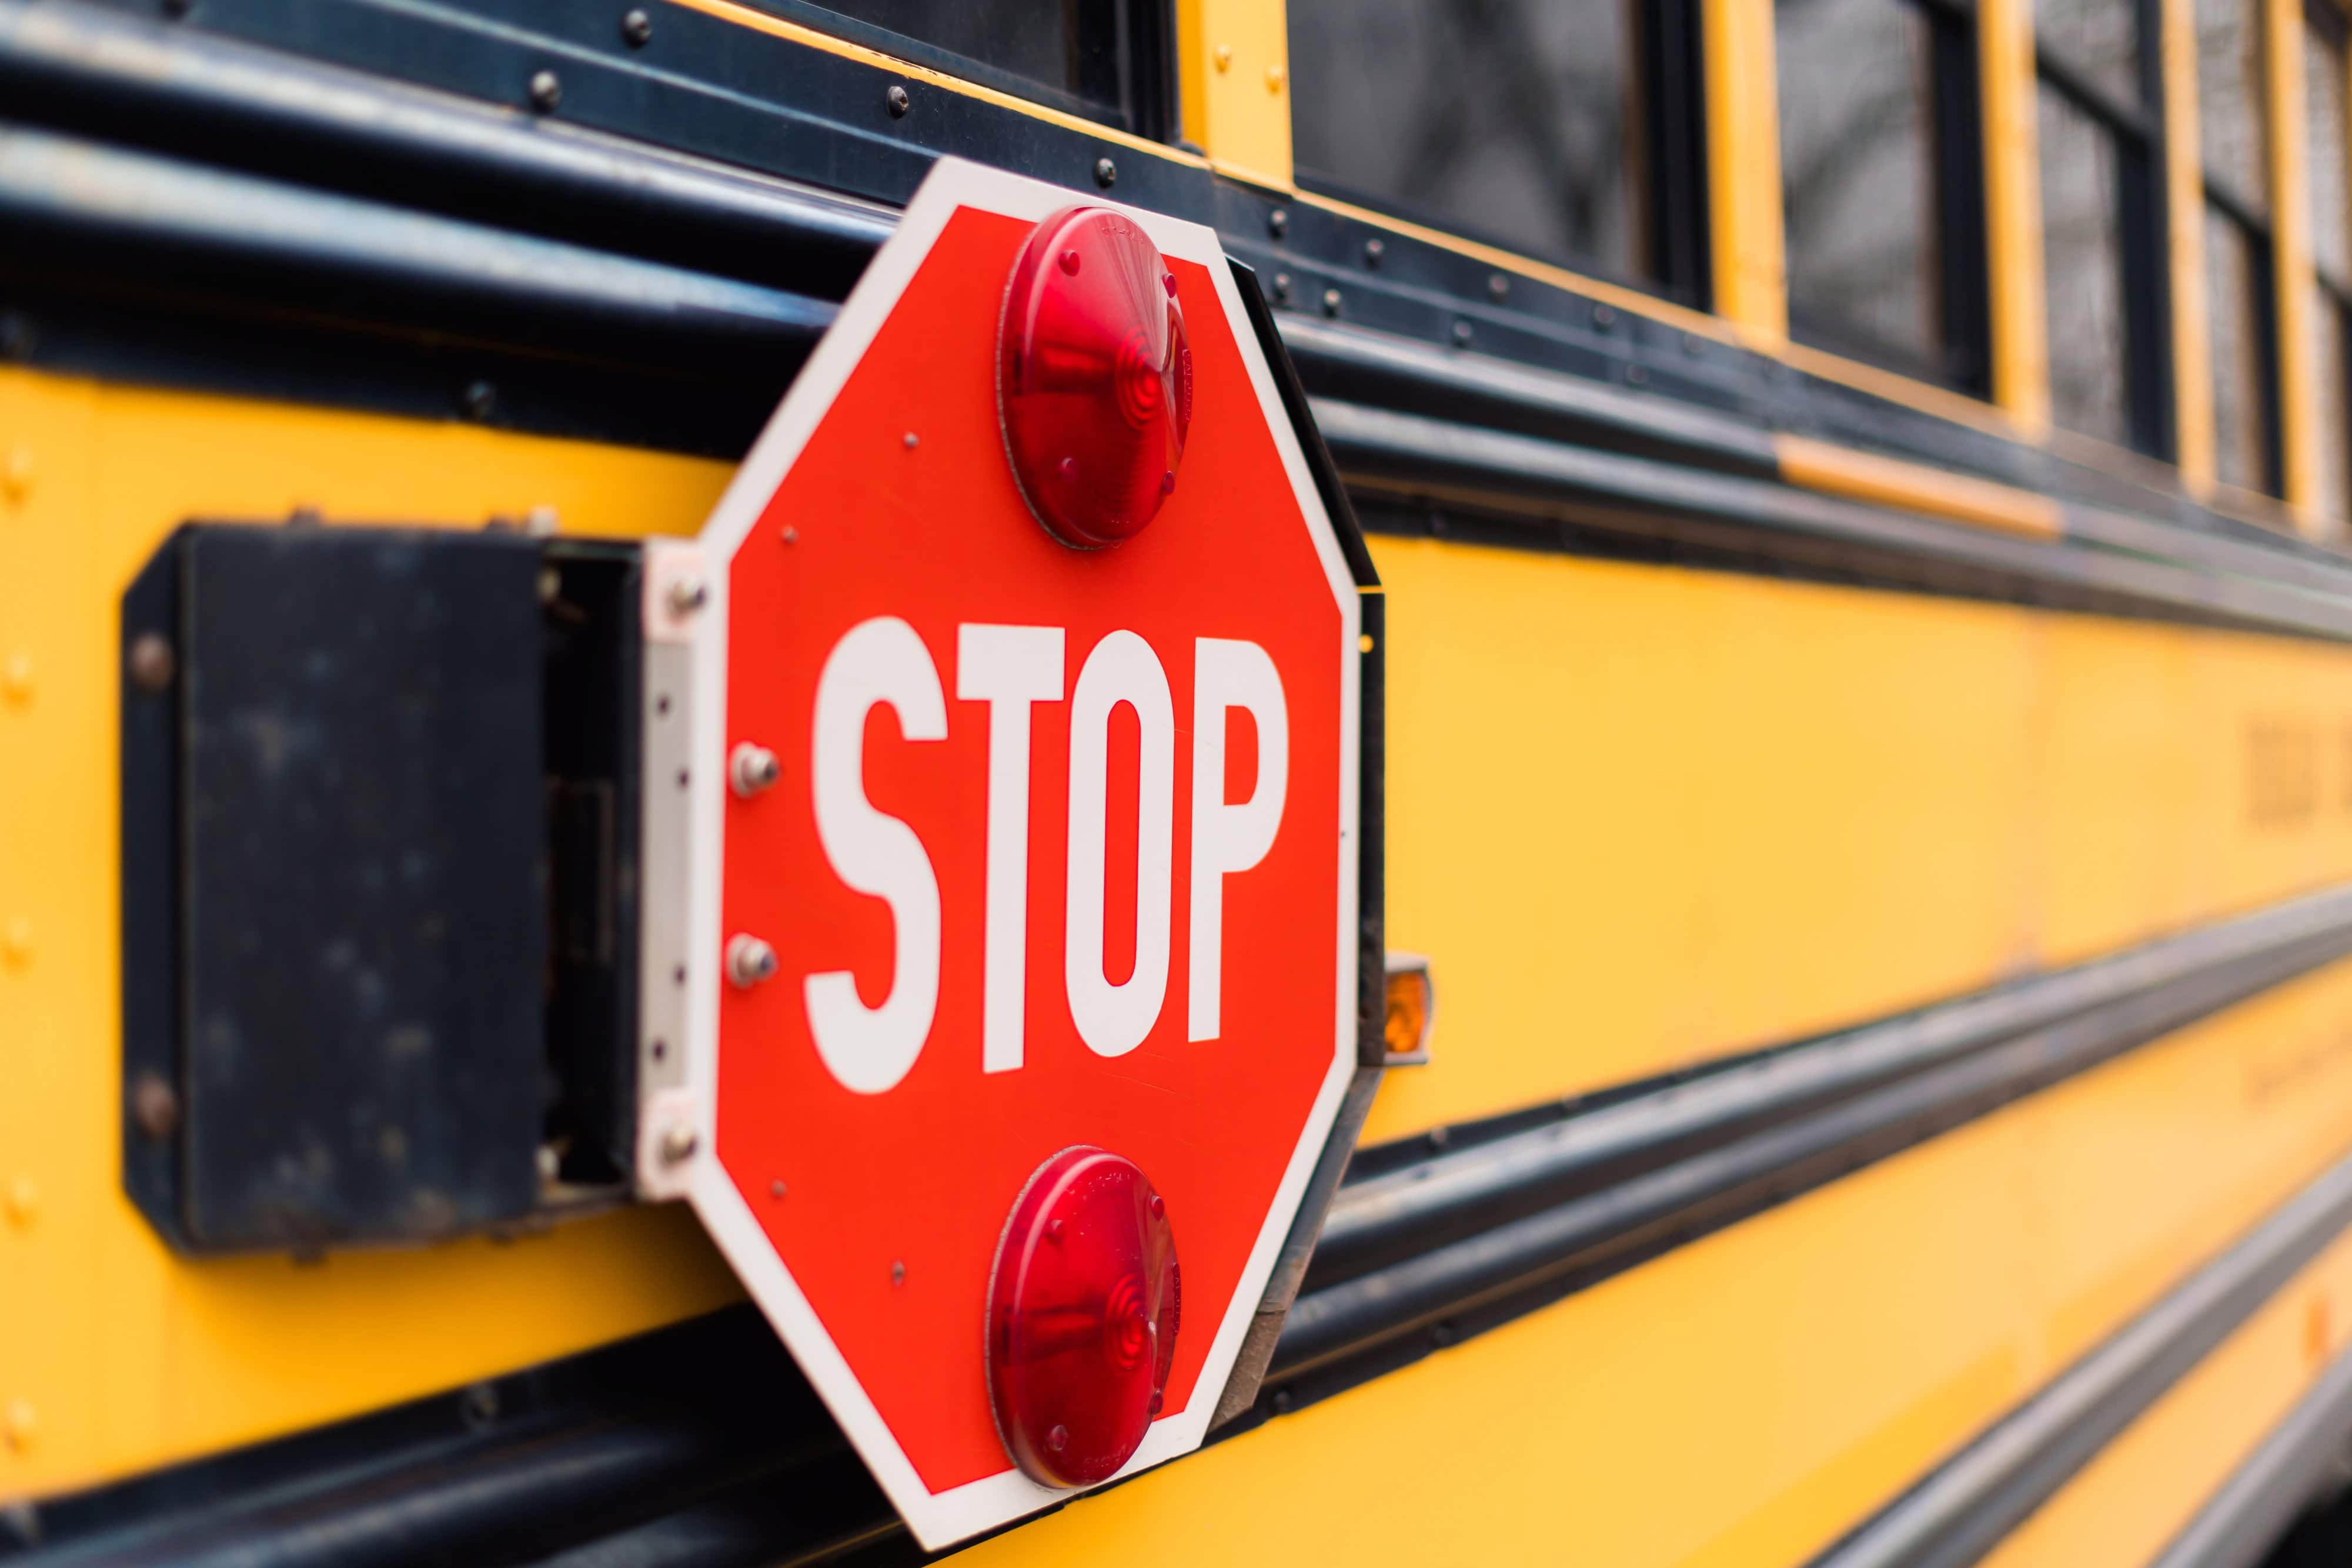 A stop sign on the side of a yellow school bus